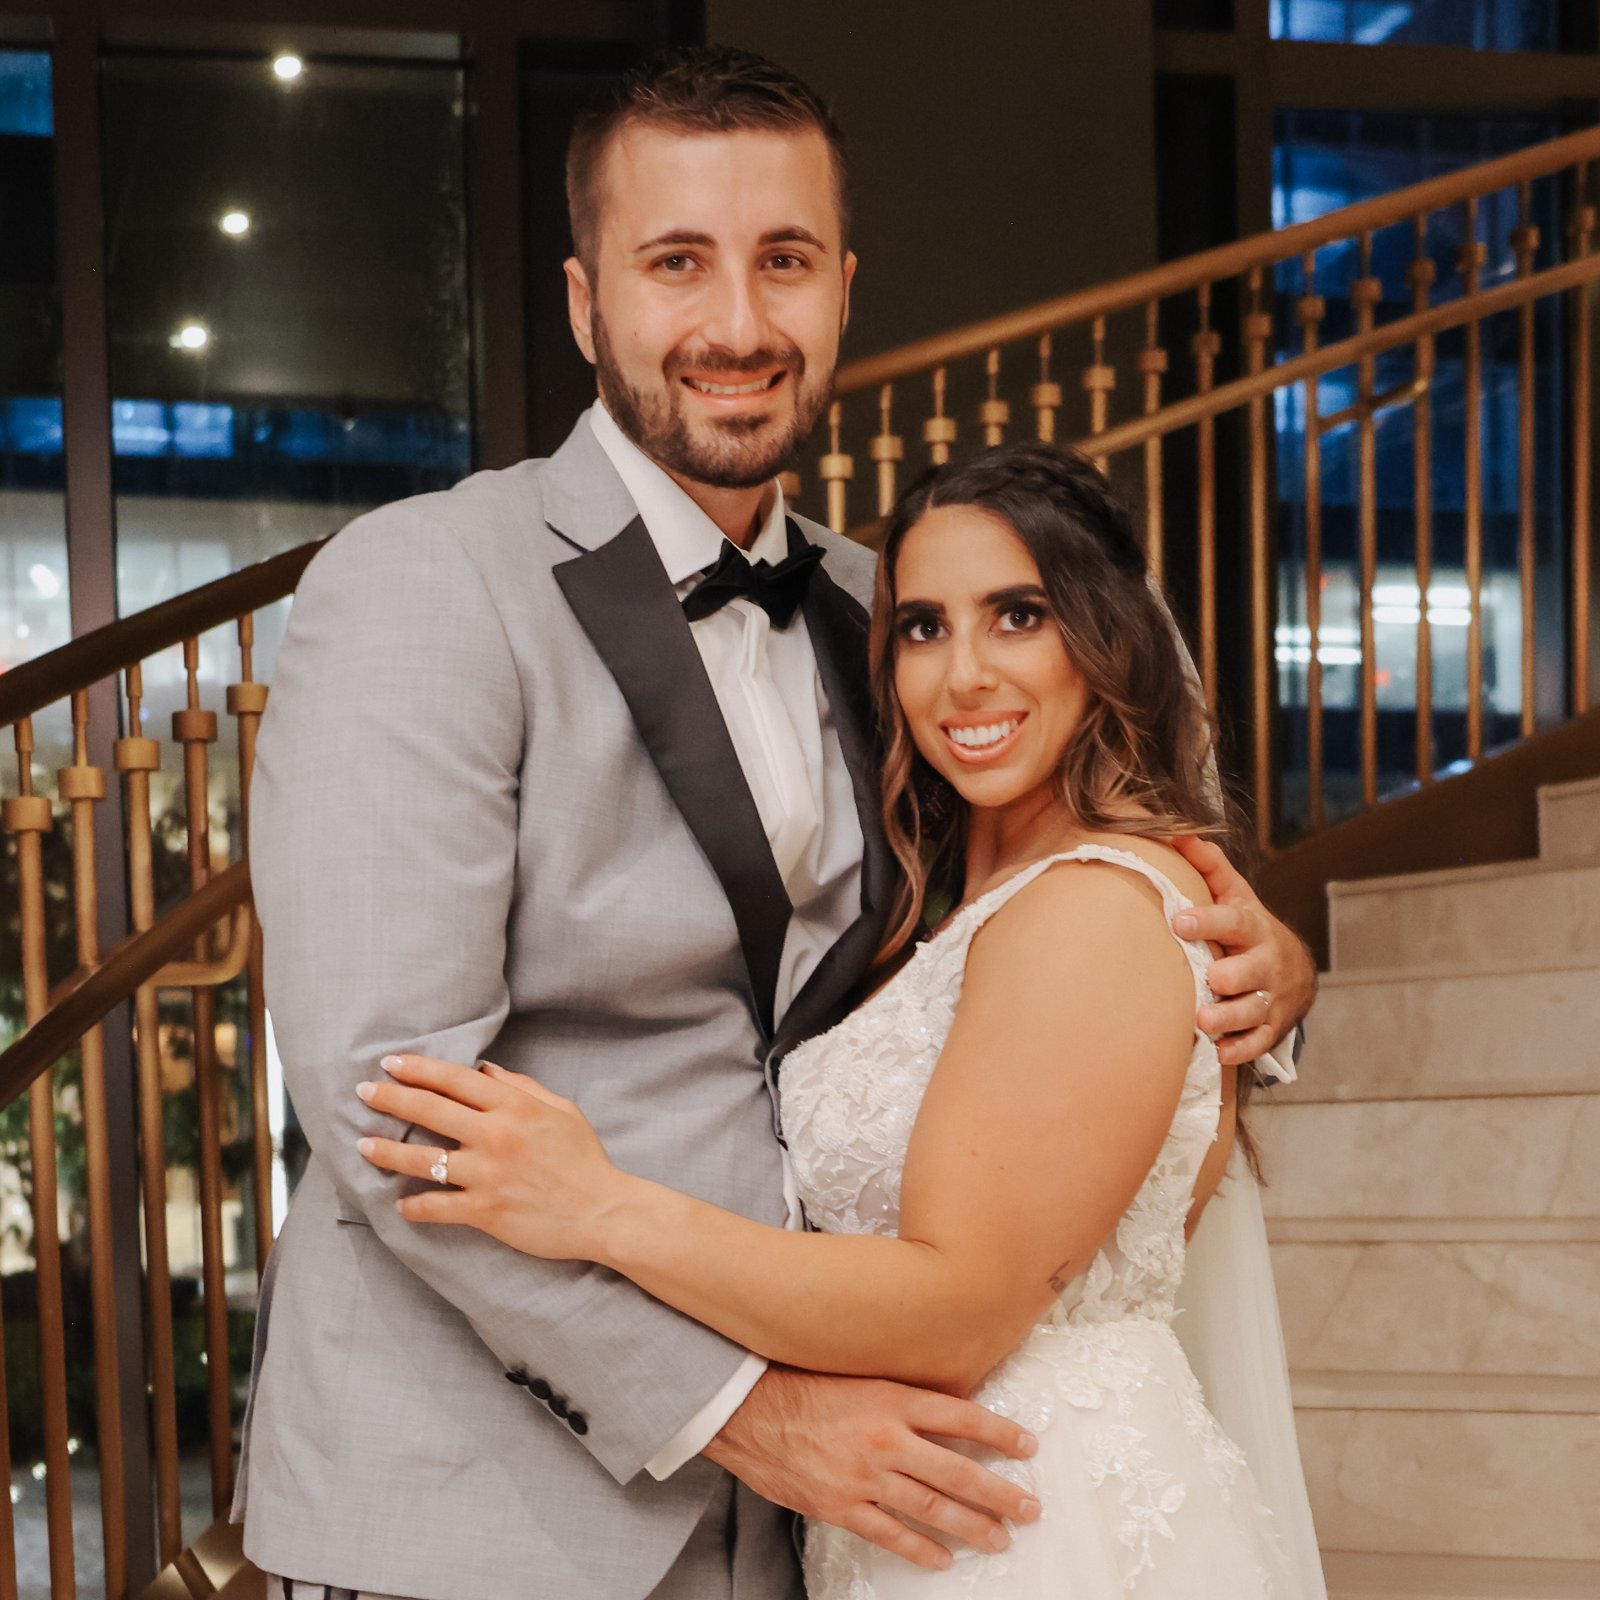 'Married at First Sight' Season 16 couples Meet the couples and learn